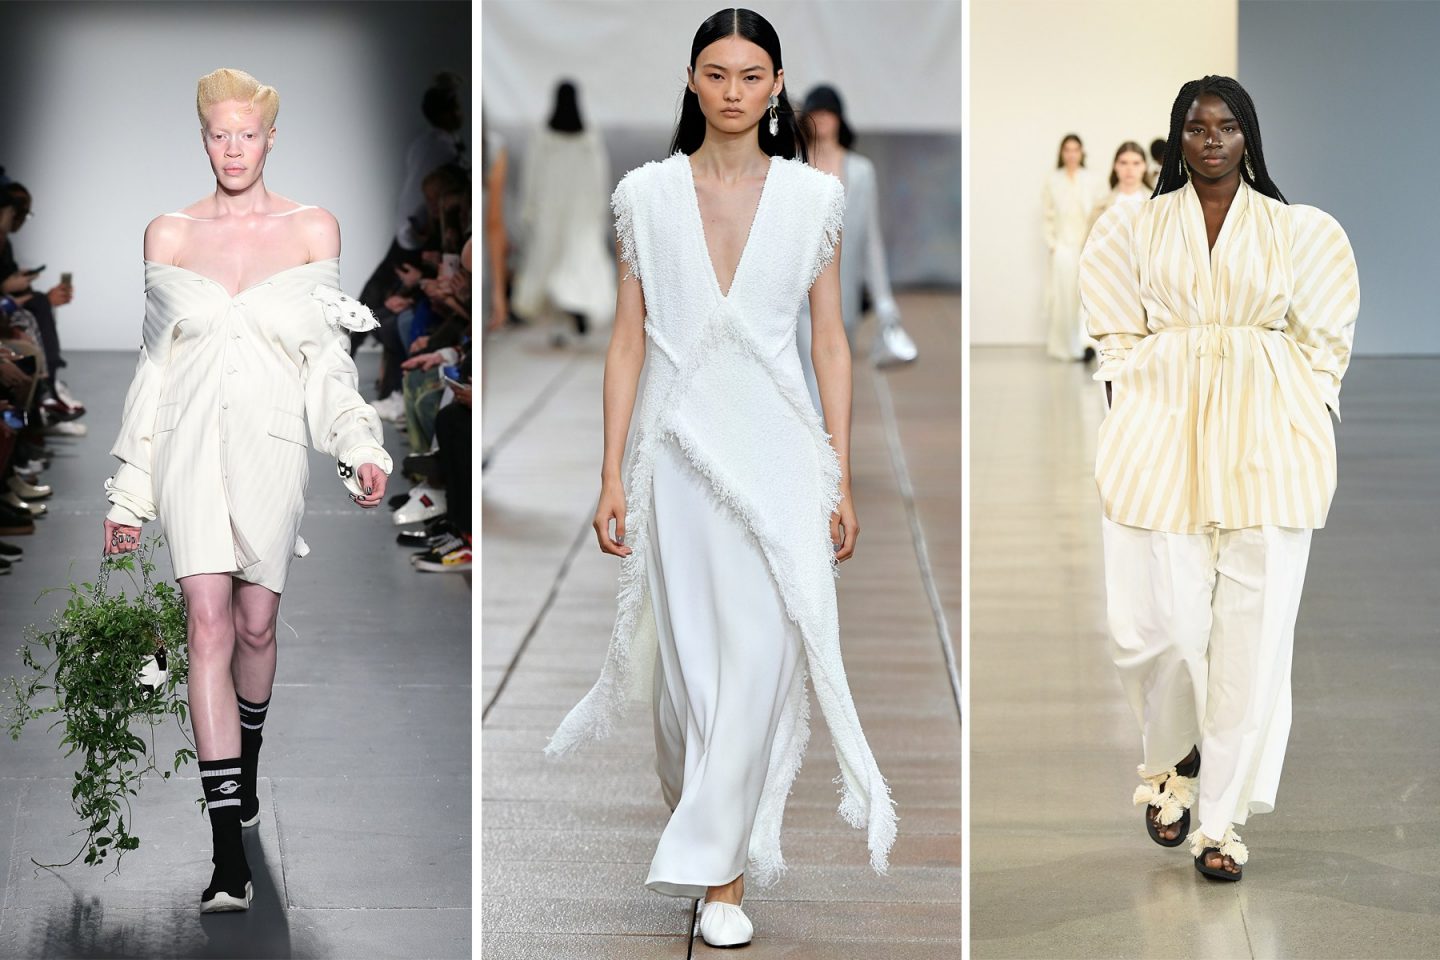 How to Wear White After Labor Day